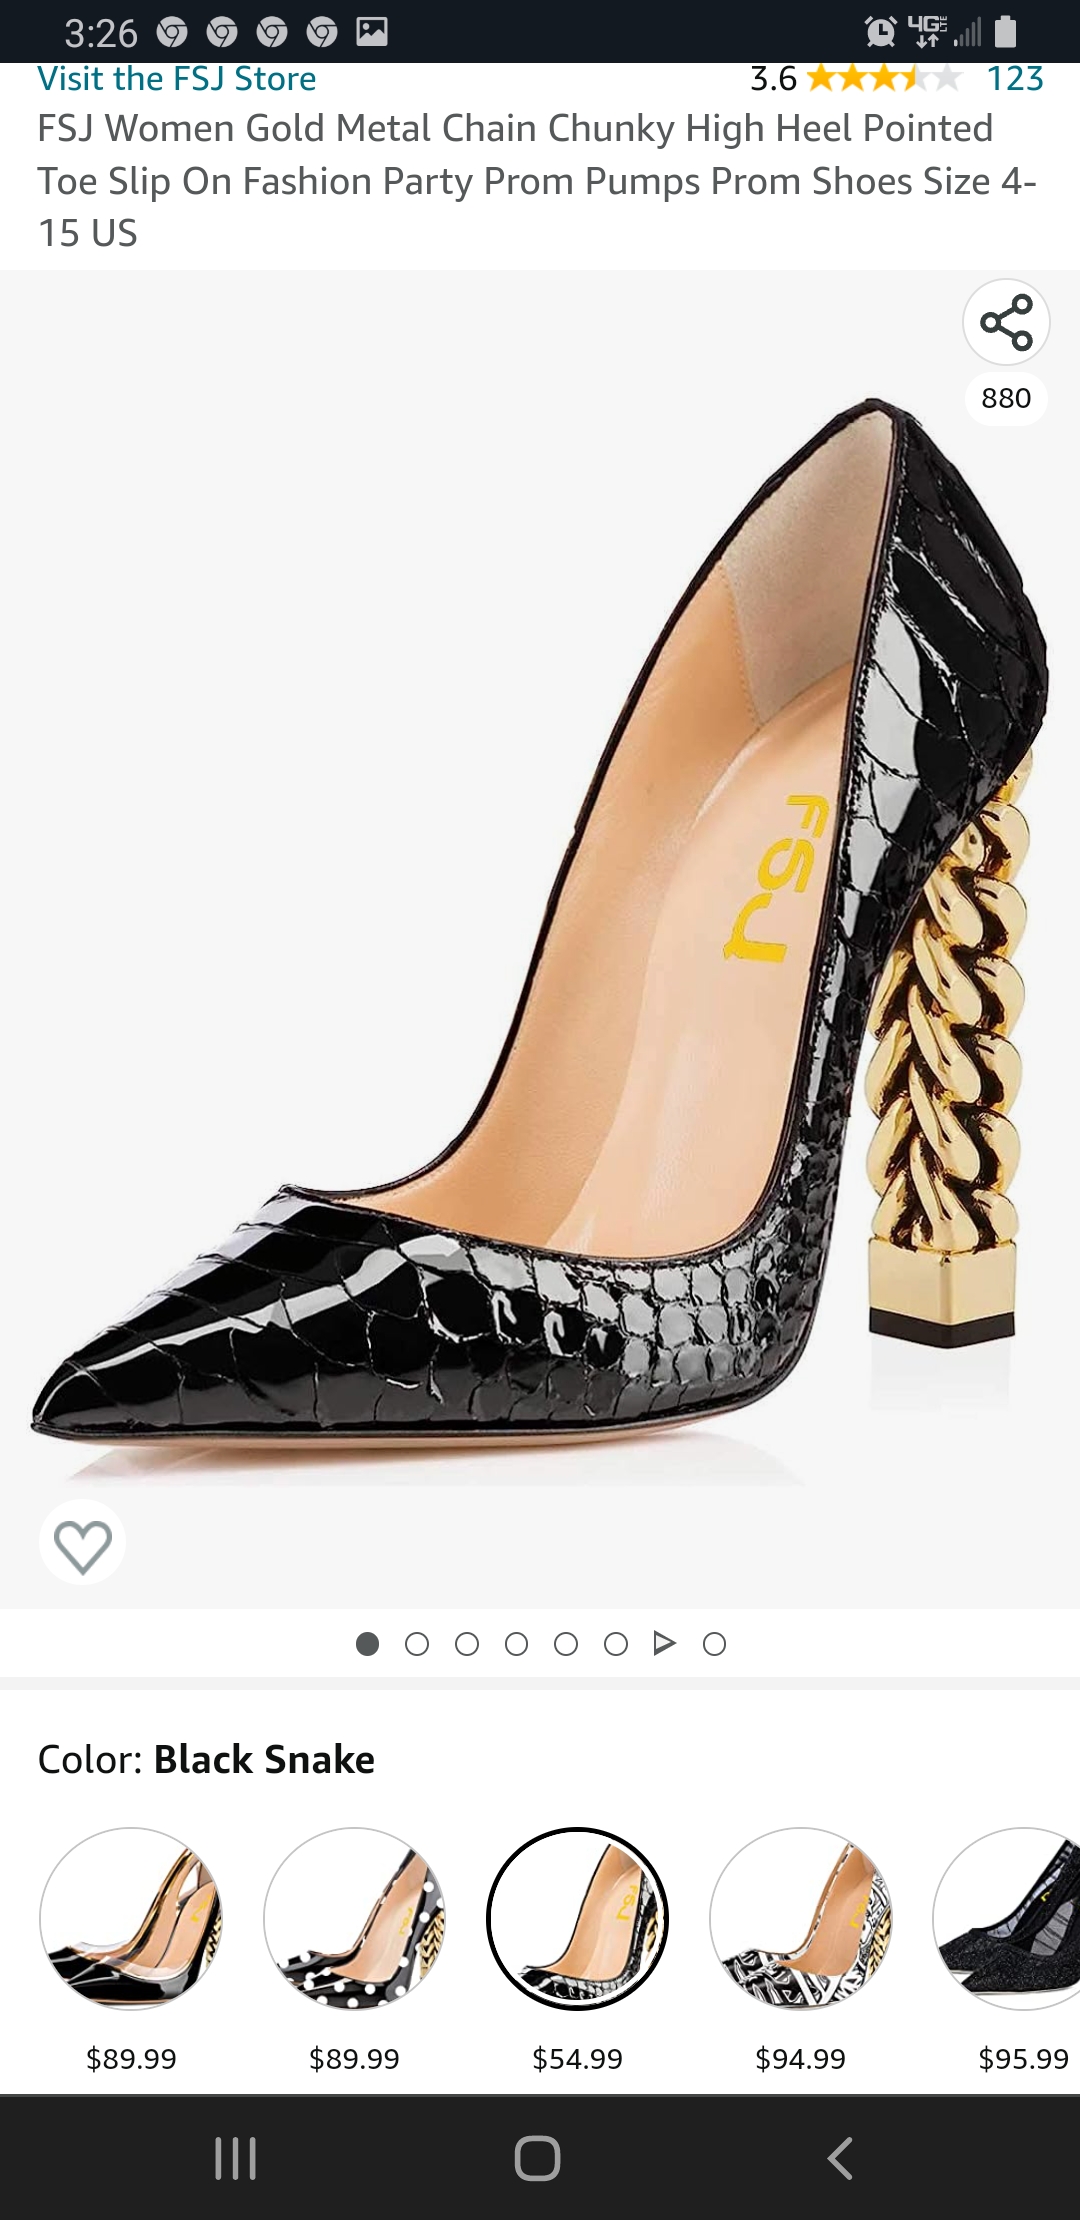 KILN © lo lo Jo ~™

 

Visit the FSJ Store 3.6

123

FSJ Women Gold Metal Chain Chunky High Heel Pointed
Toe Slip On Fashion Party Prom Pumps Prom Shoes Size 4-

15 US

 

Color: Black Snake

~

5, oe f

$89.99 $89.99 $54.99 $94.99

11 @)

Be

53

 

   

&lt;

 

 

$95.99